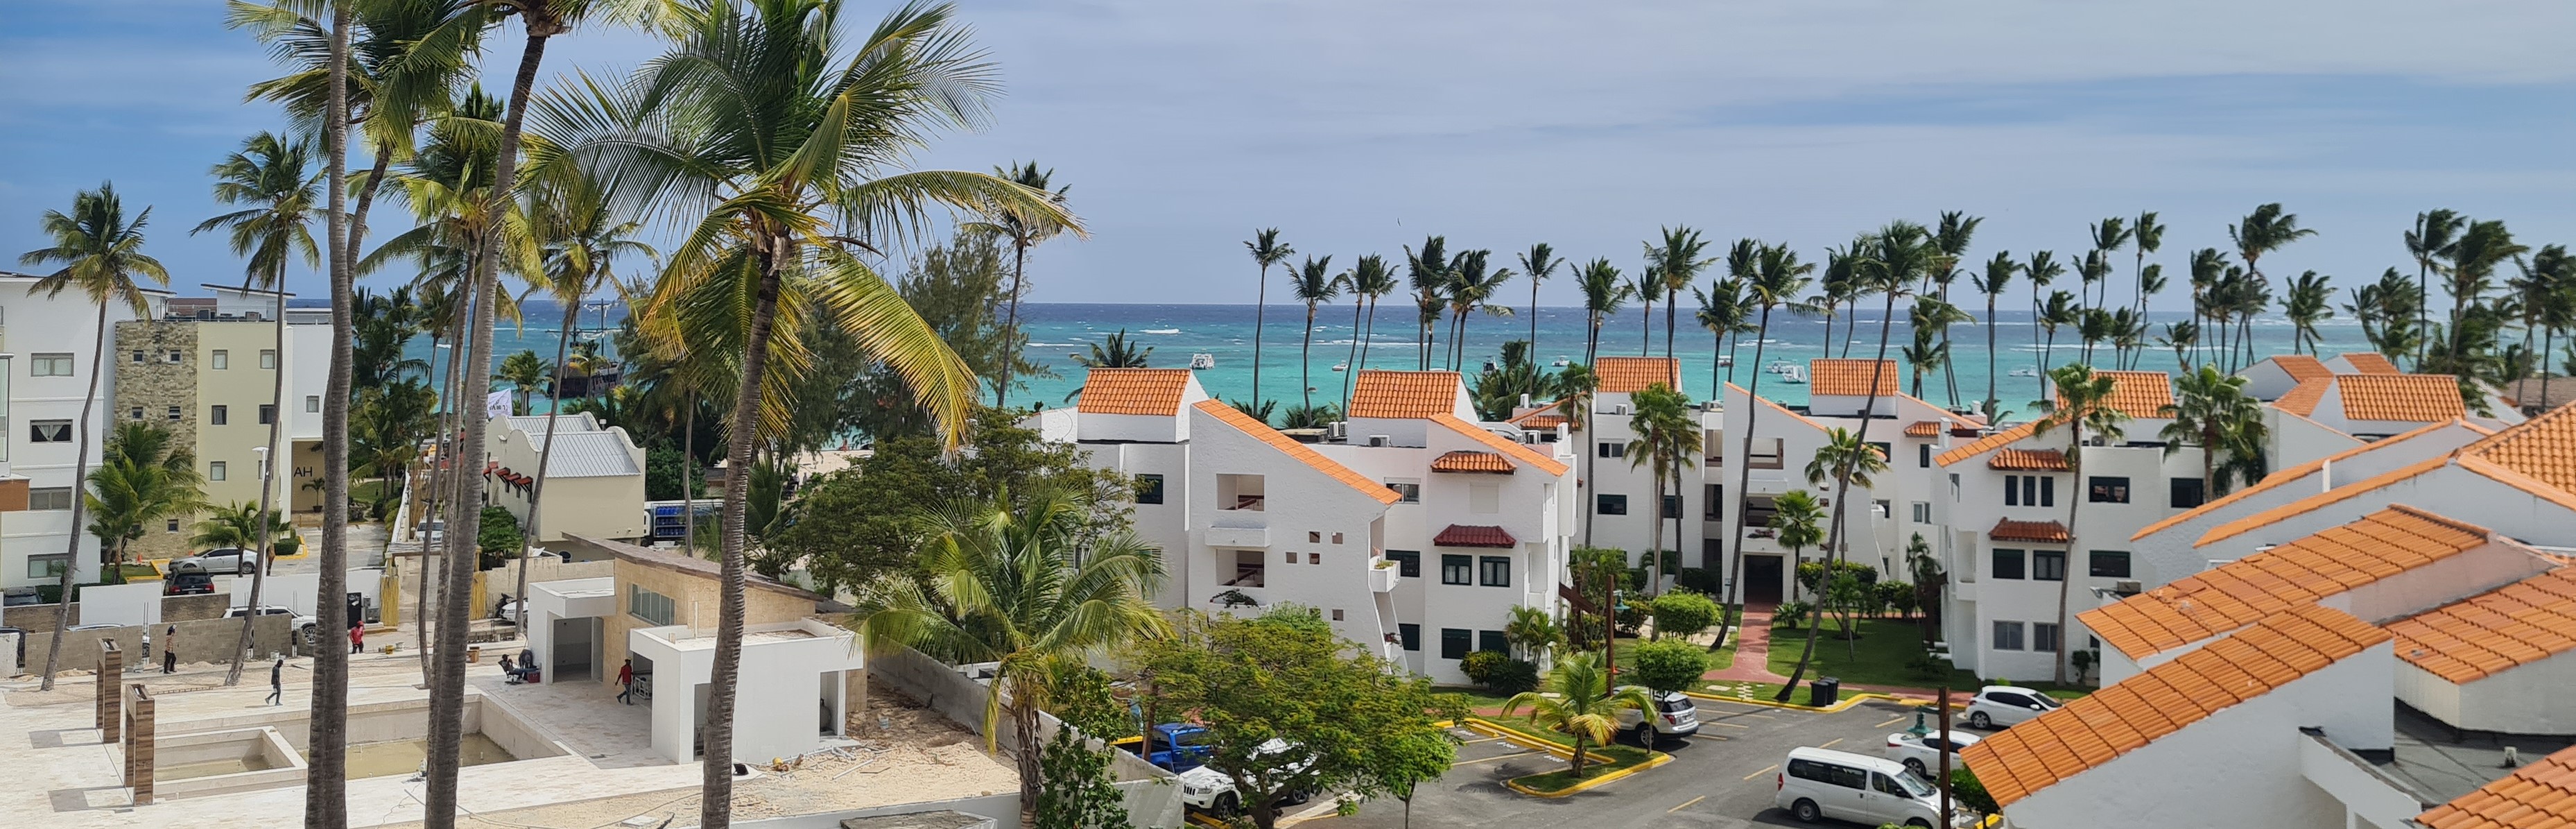 Why Buy in Punta Cana?